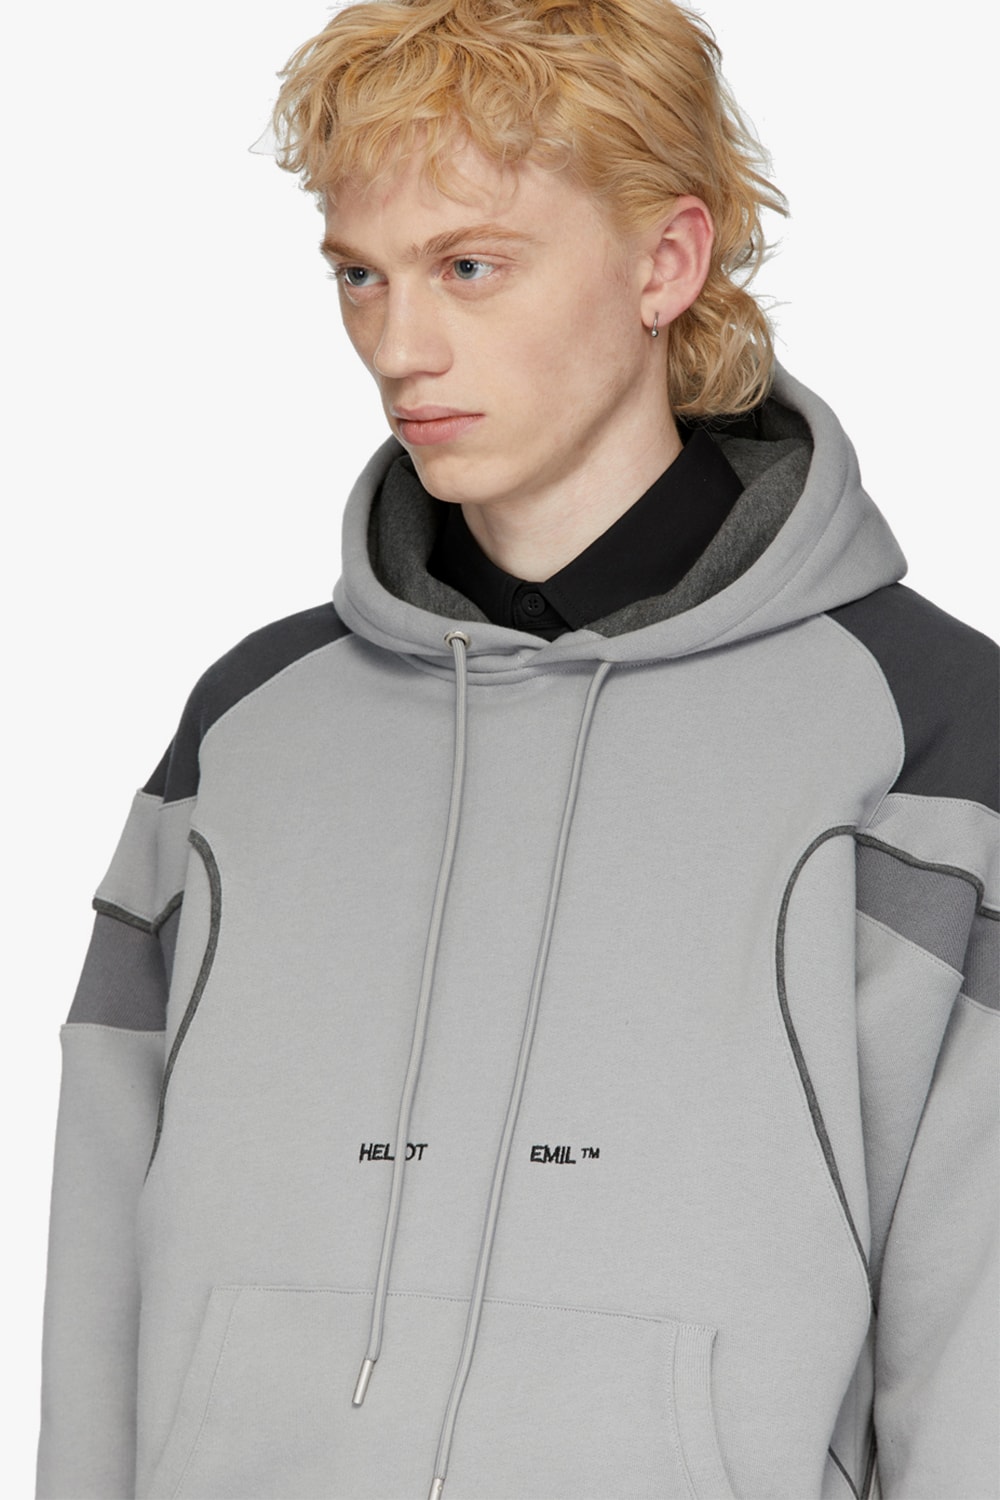 HELIOT EMIL Drops Grey Panel Hoodie  sweatshirts hood terry cotton embroidery logo colorblocking release info drop price details 